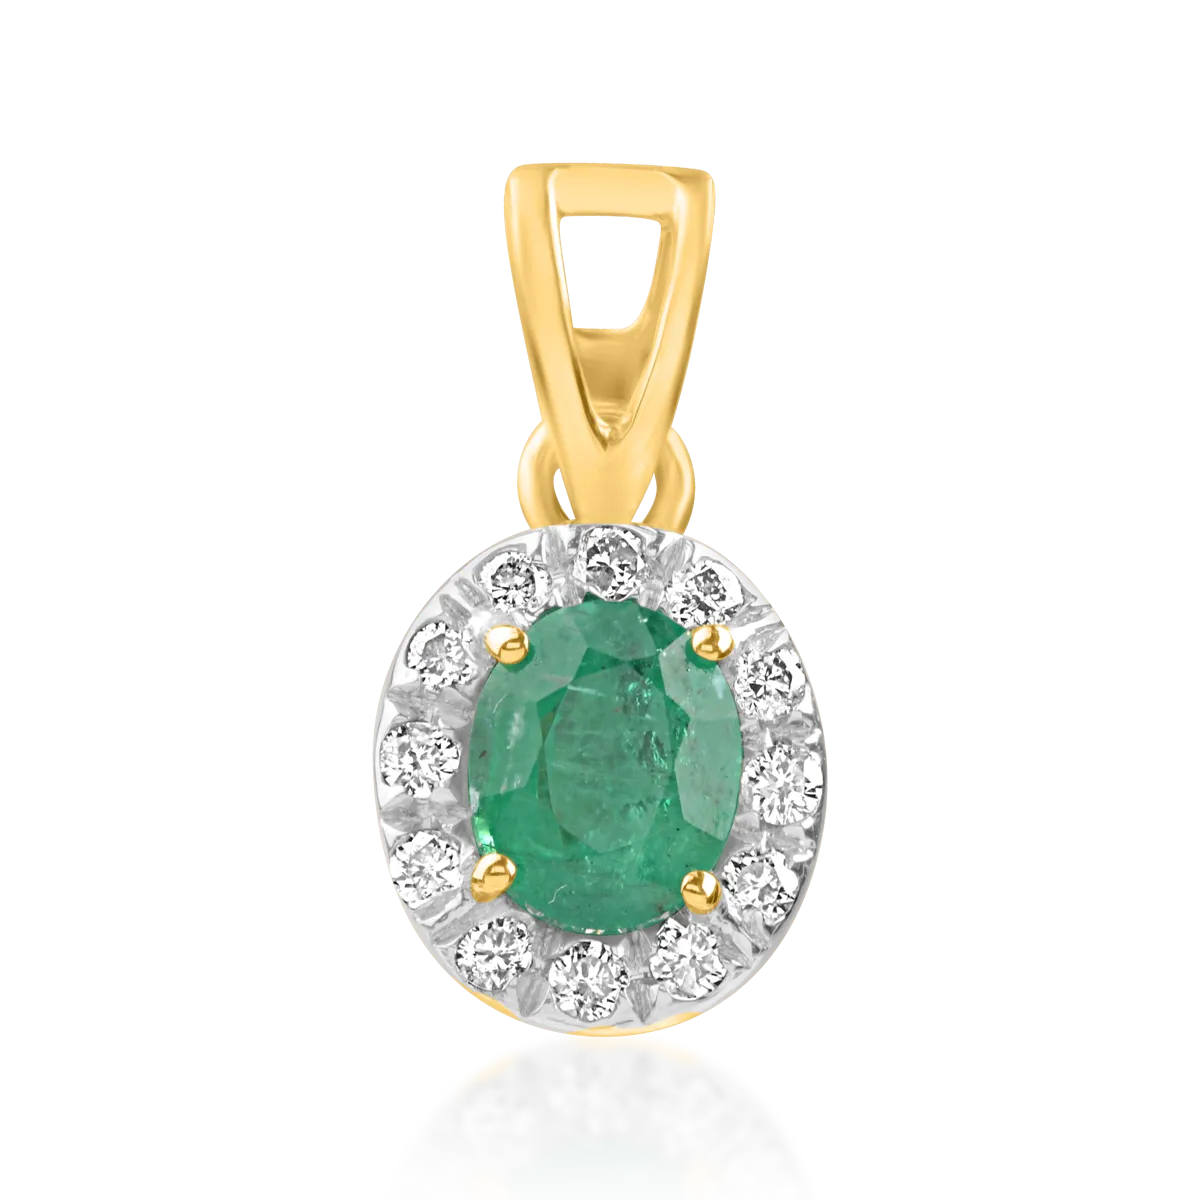 14K white-yellow gold pendant with 0.61ct emerald and 0.13ct diamonds